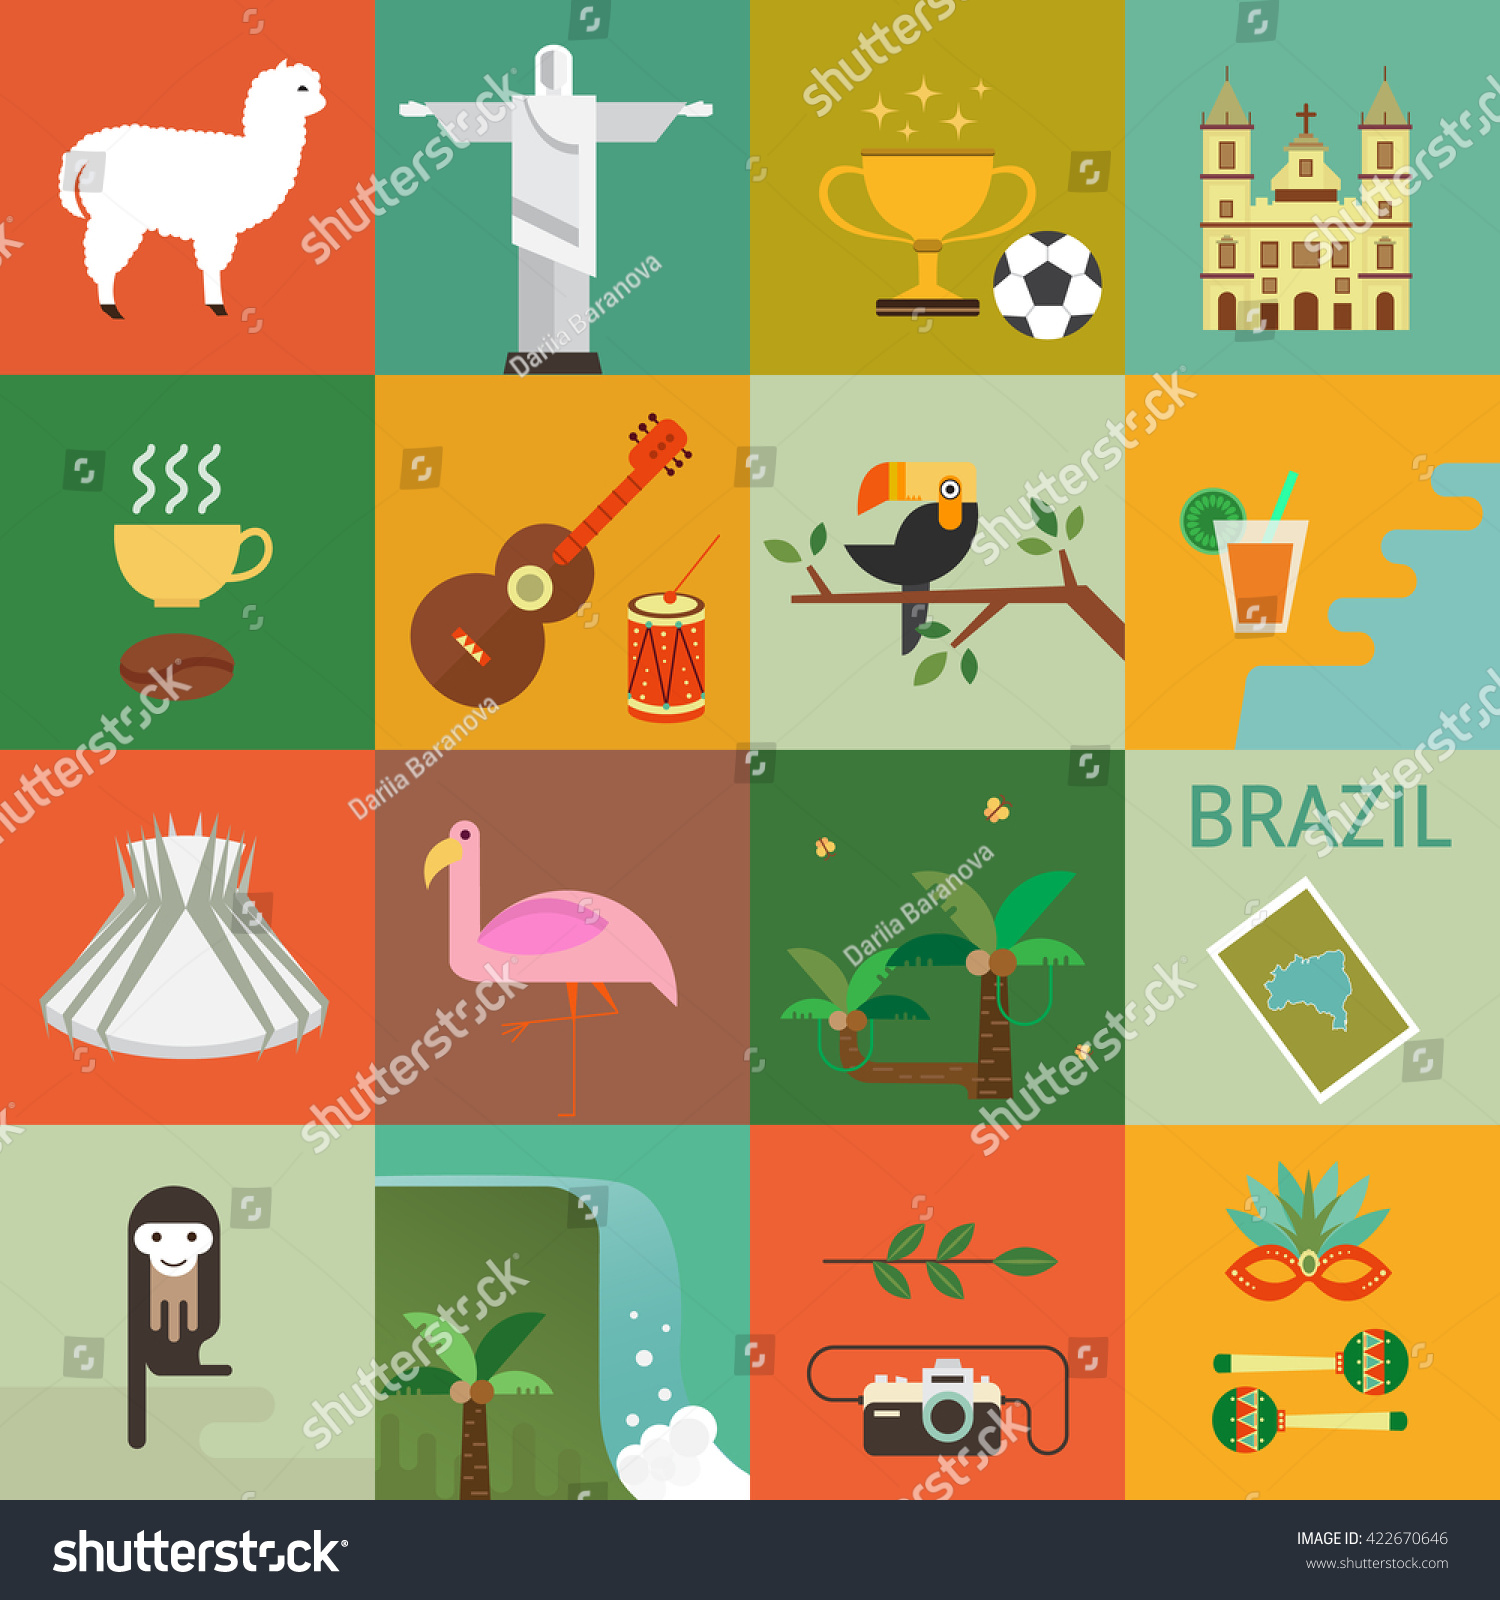 SVG of Vector illustration with Brazil symbols  made in modern flat style. Travel to Brazil concept. Flat icons arranged in square. svg